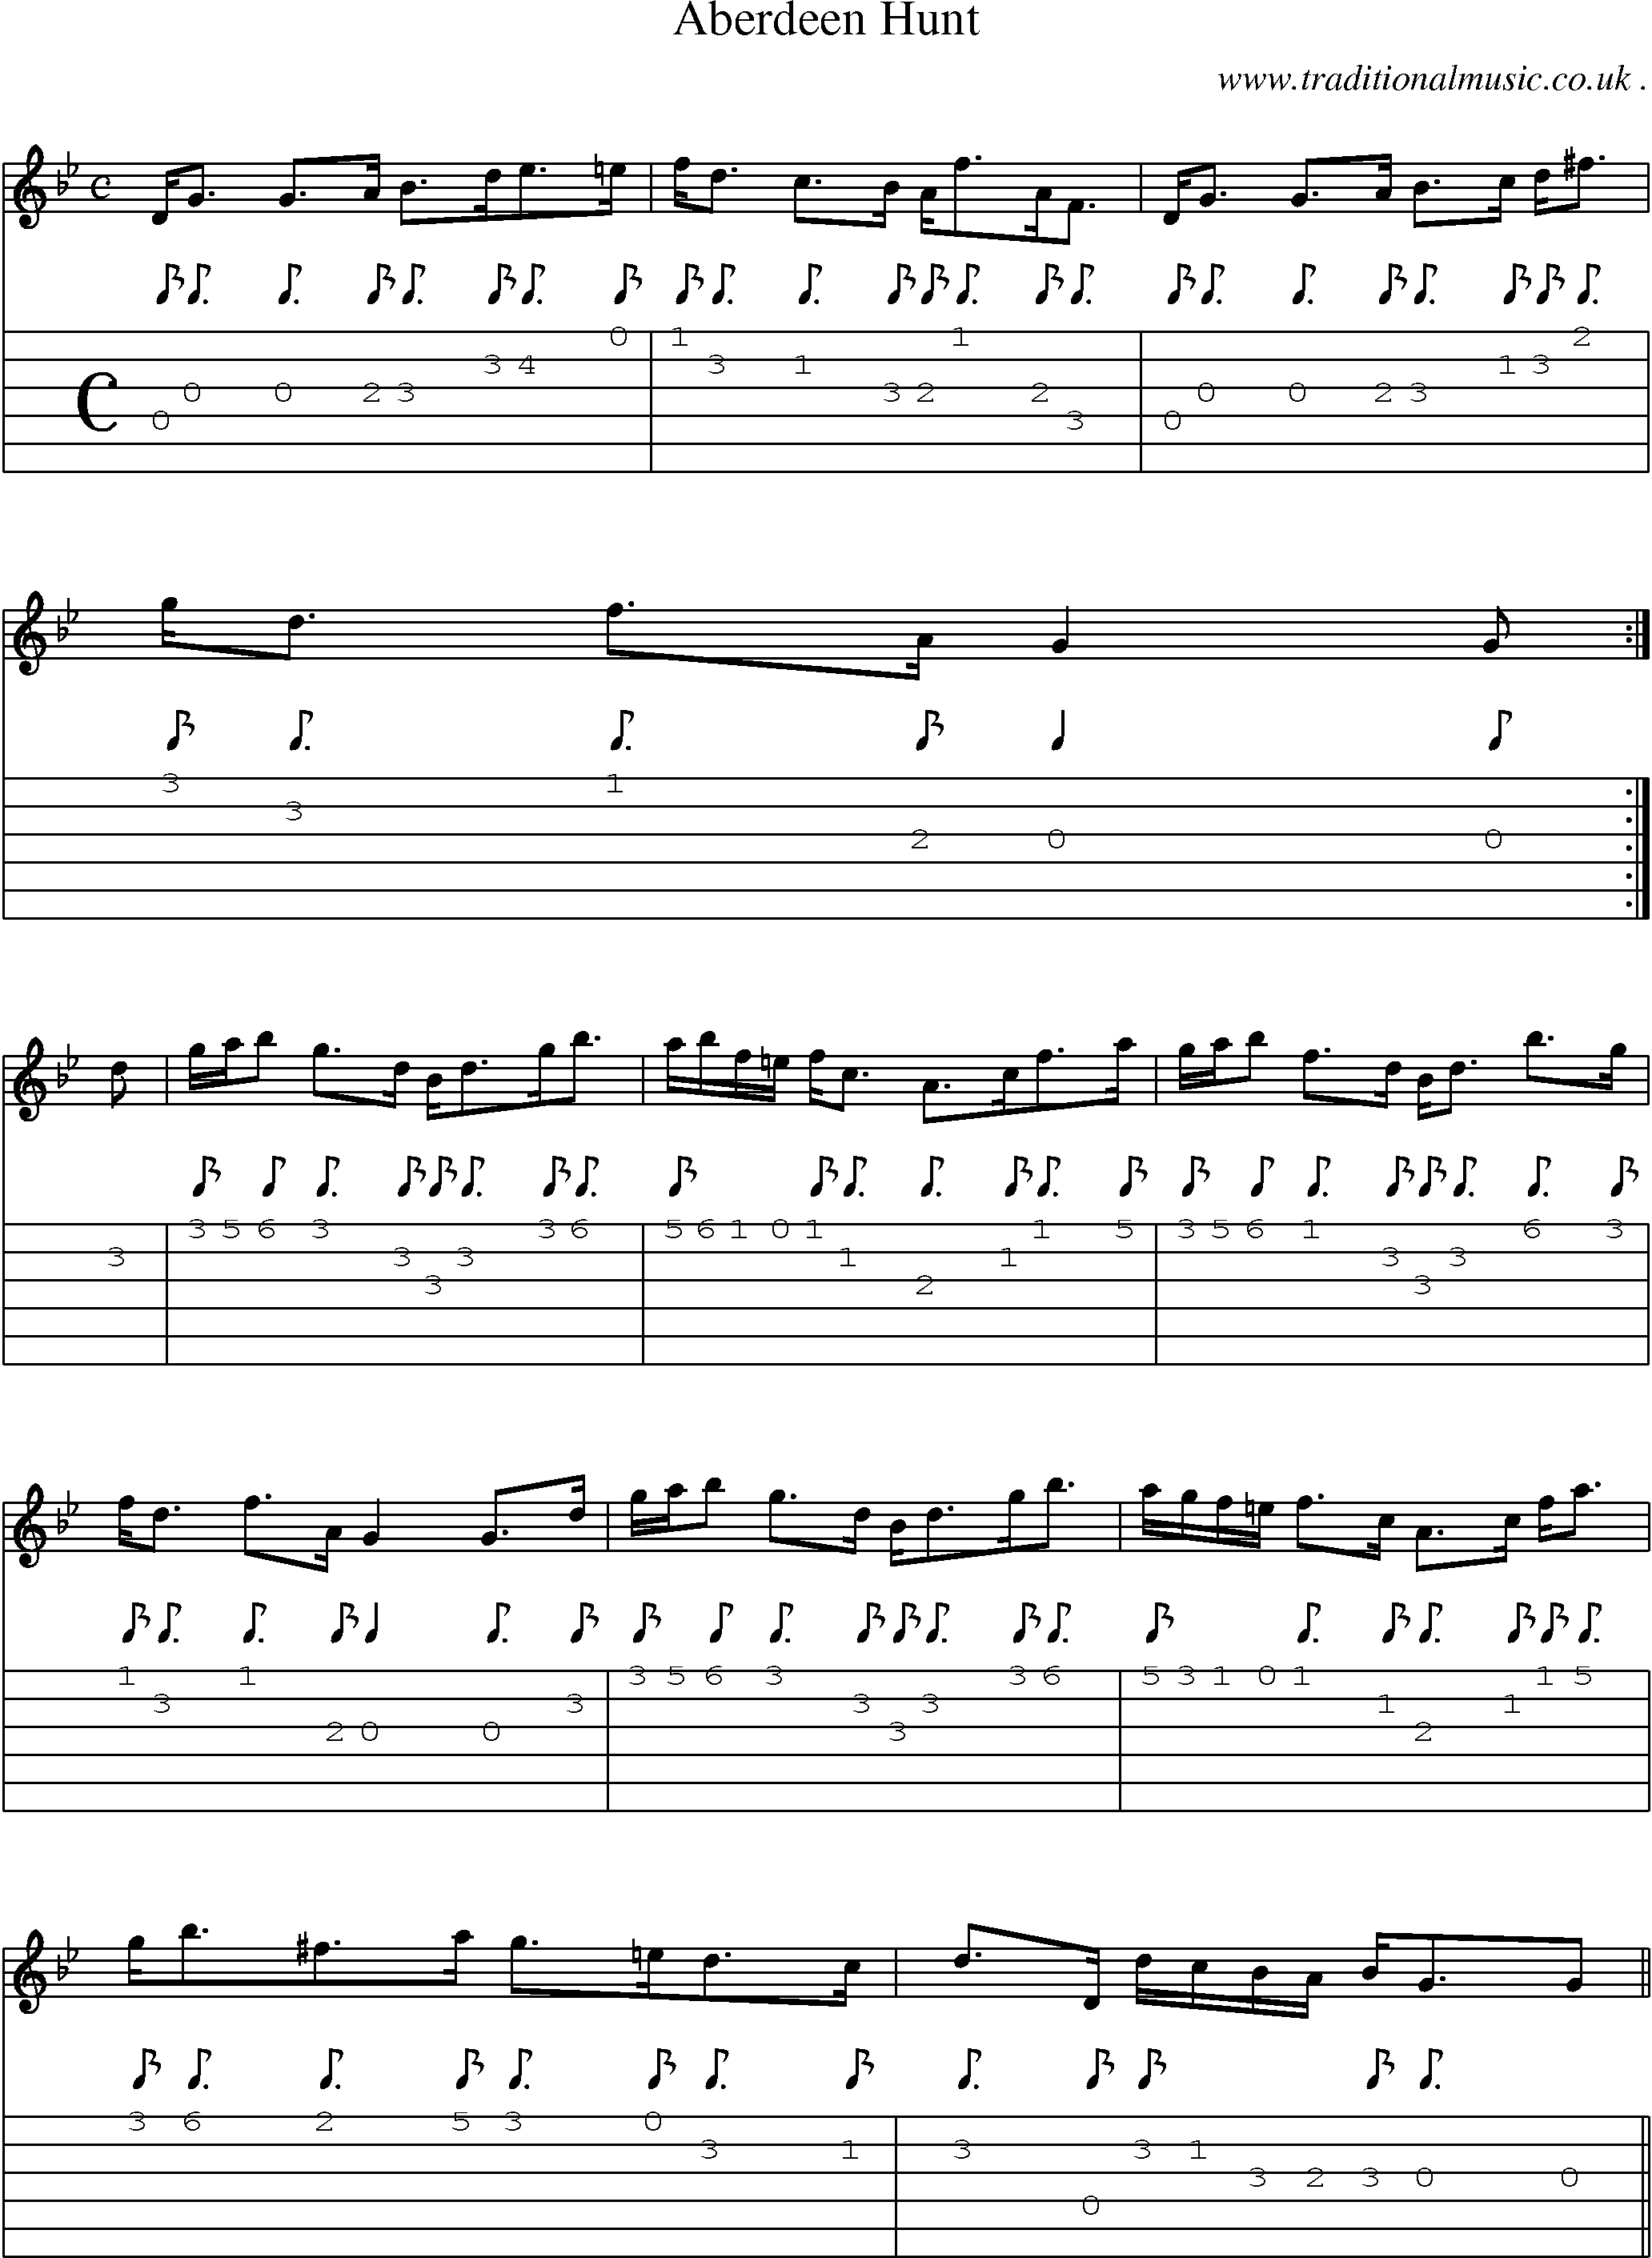 Sheet-music  score, Chords and Guitar Tabs for Aberdeen Hunt